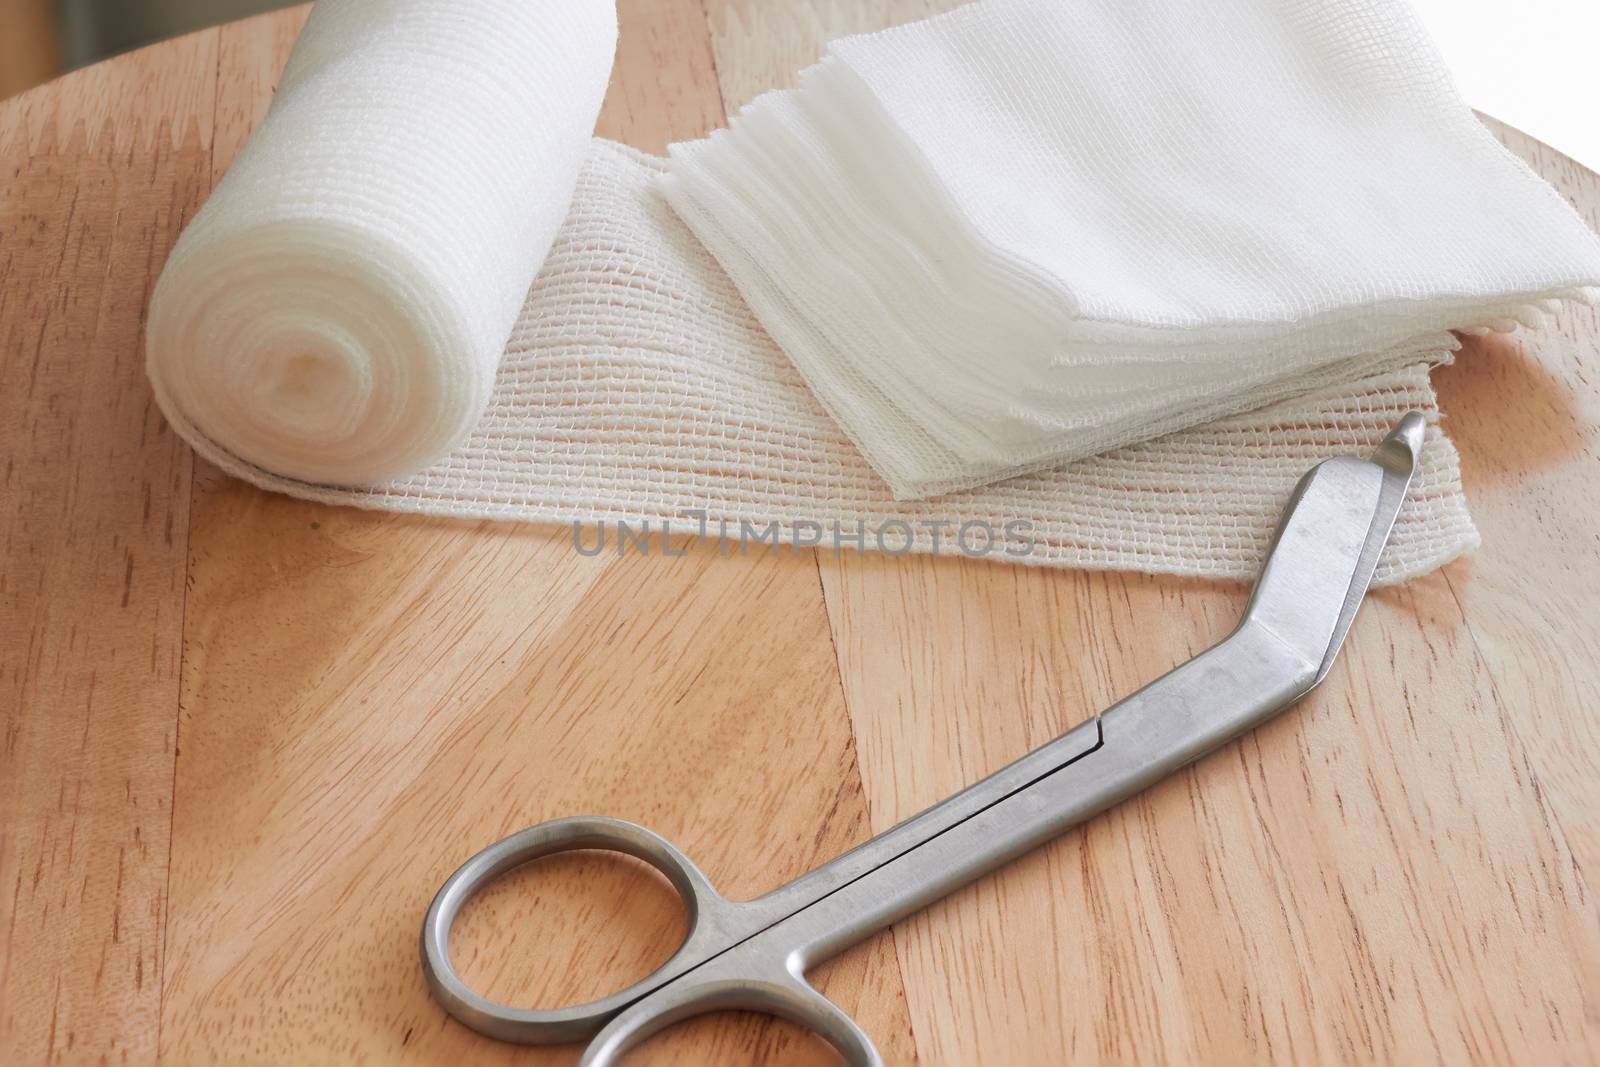 Dressing or clean wound tools includes Roll gauze,pile of gauzes and gauze roll cutter or scissors with sun flare